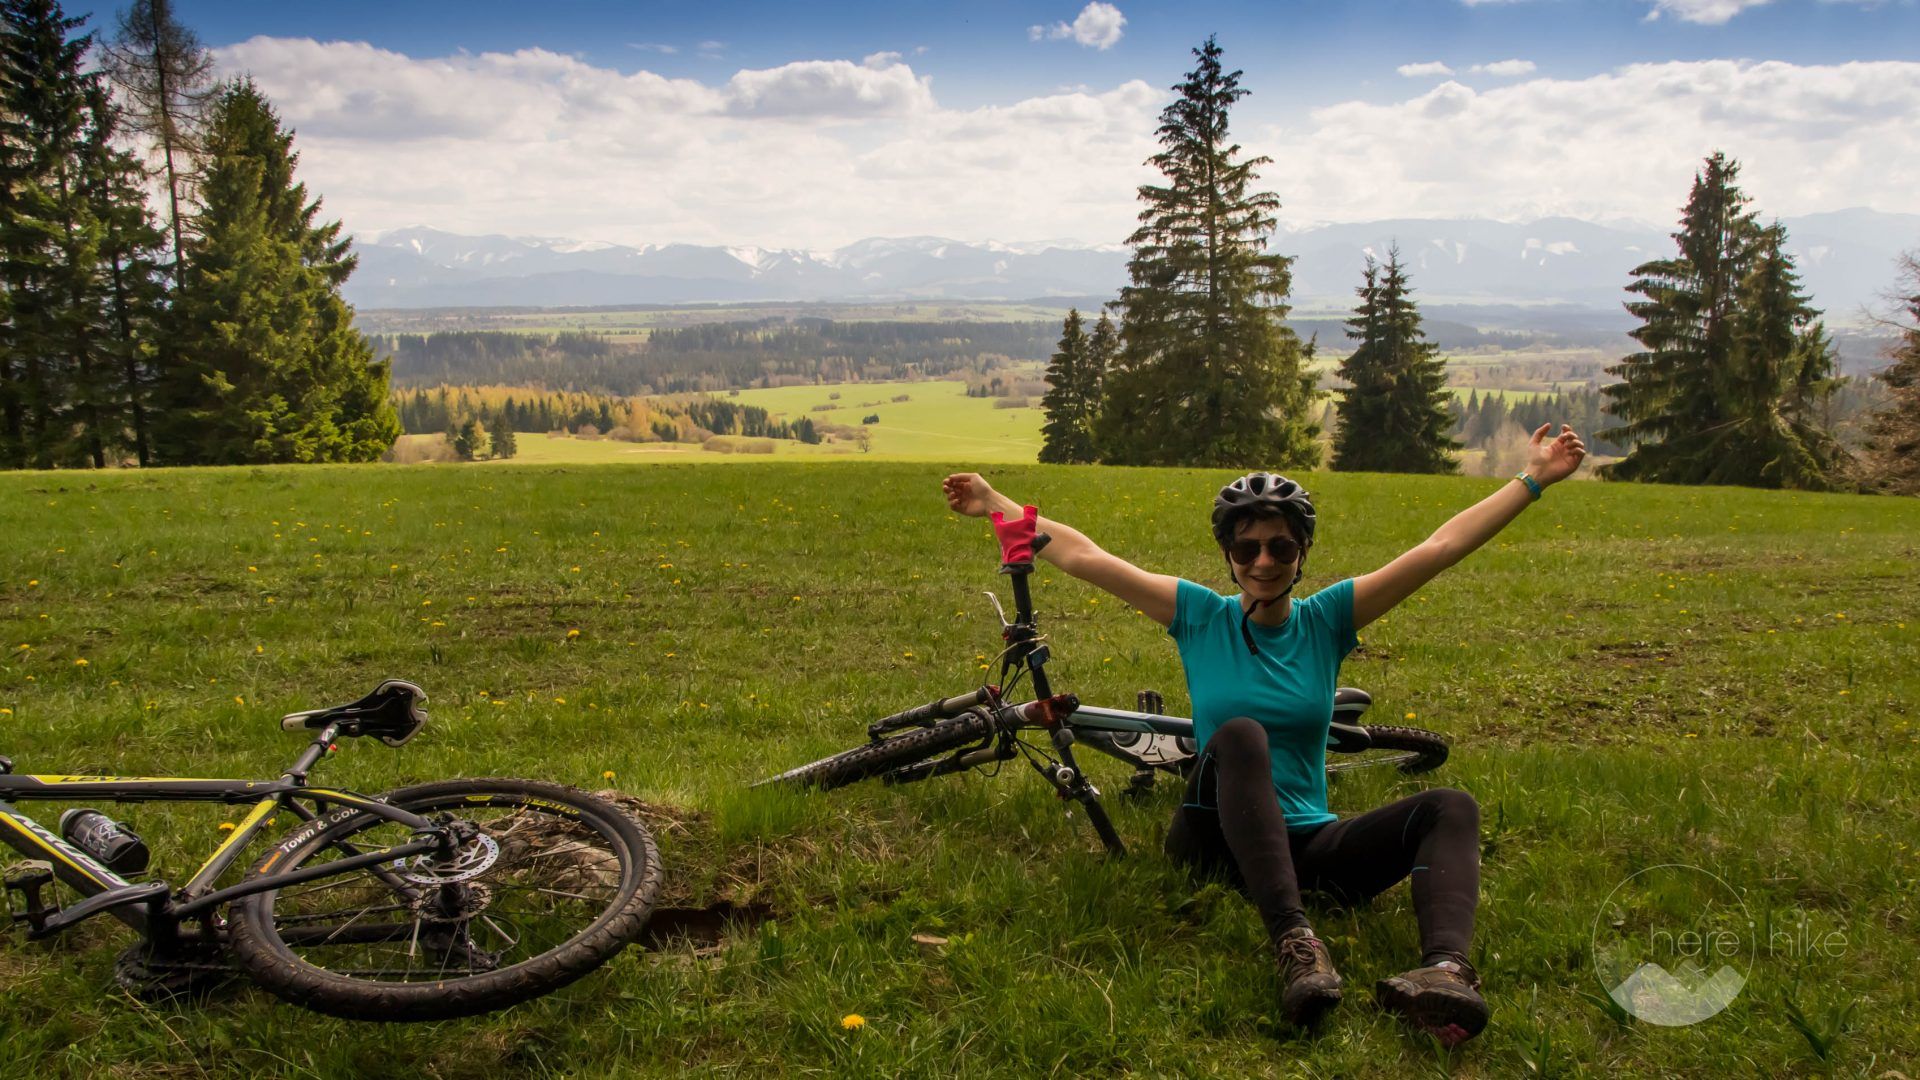 Slovakia on bicycle: Onroad and Offroad - Best Circuit - Hereihike